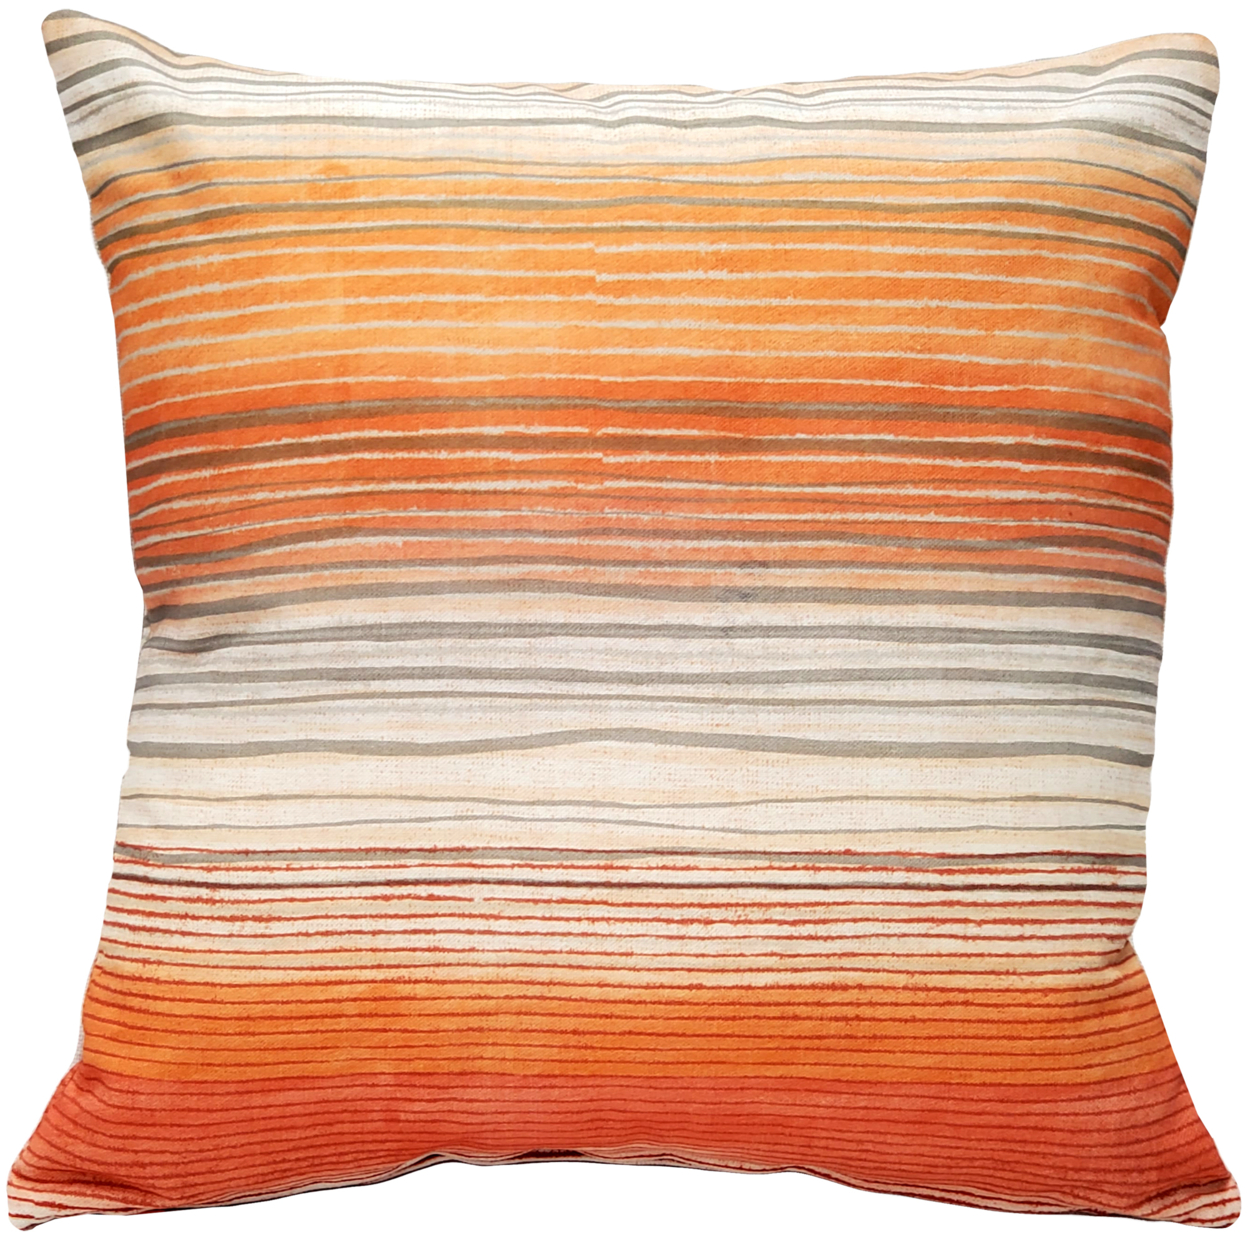 Sedona Stripes Orange Throw Pillow 17x17 Inches Square, Complete Pillow With Polyfill Pillow Insert